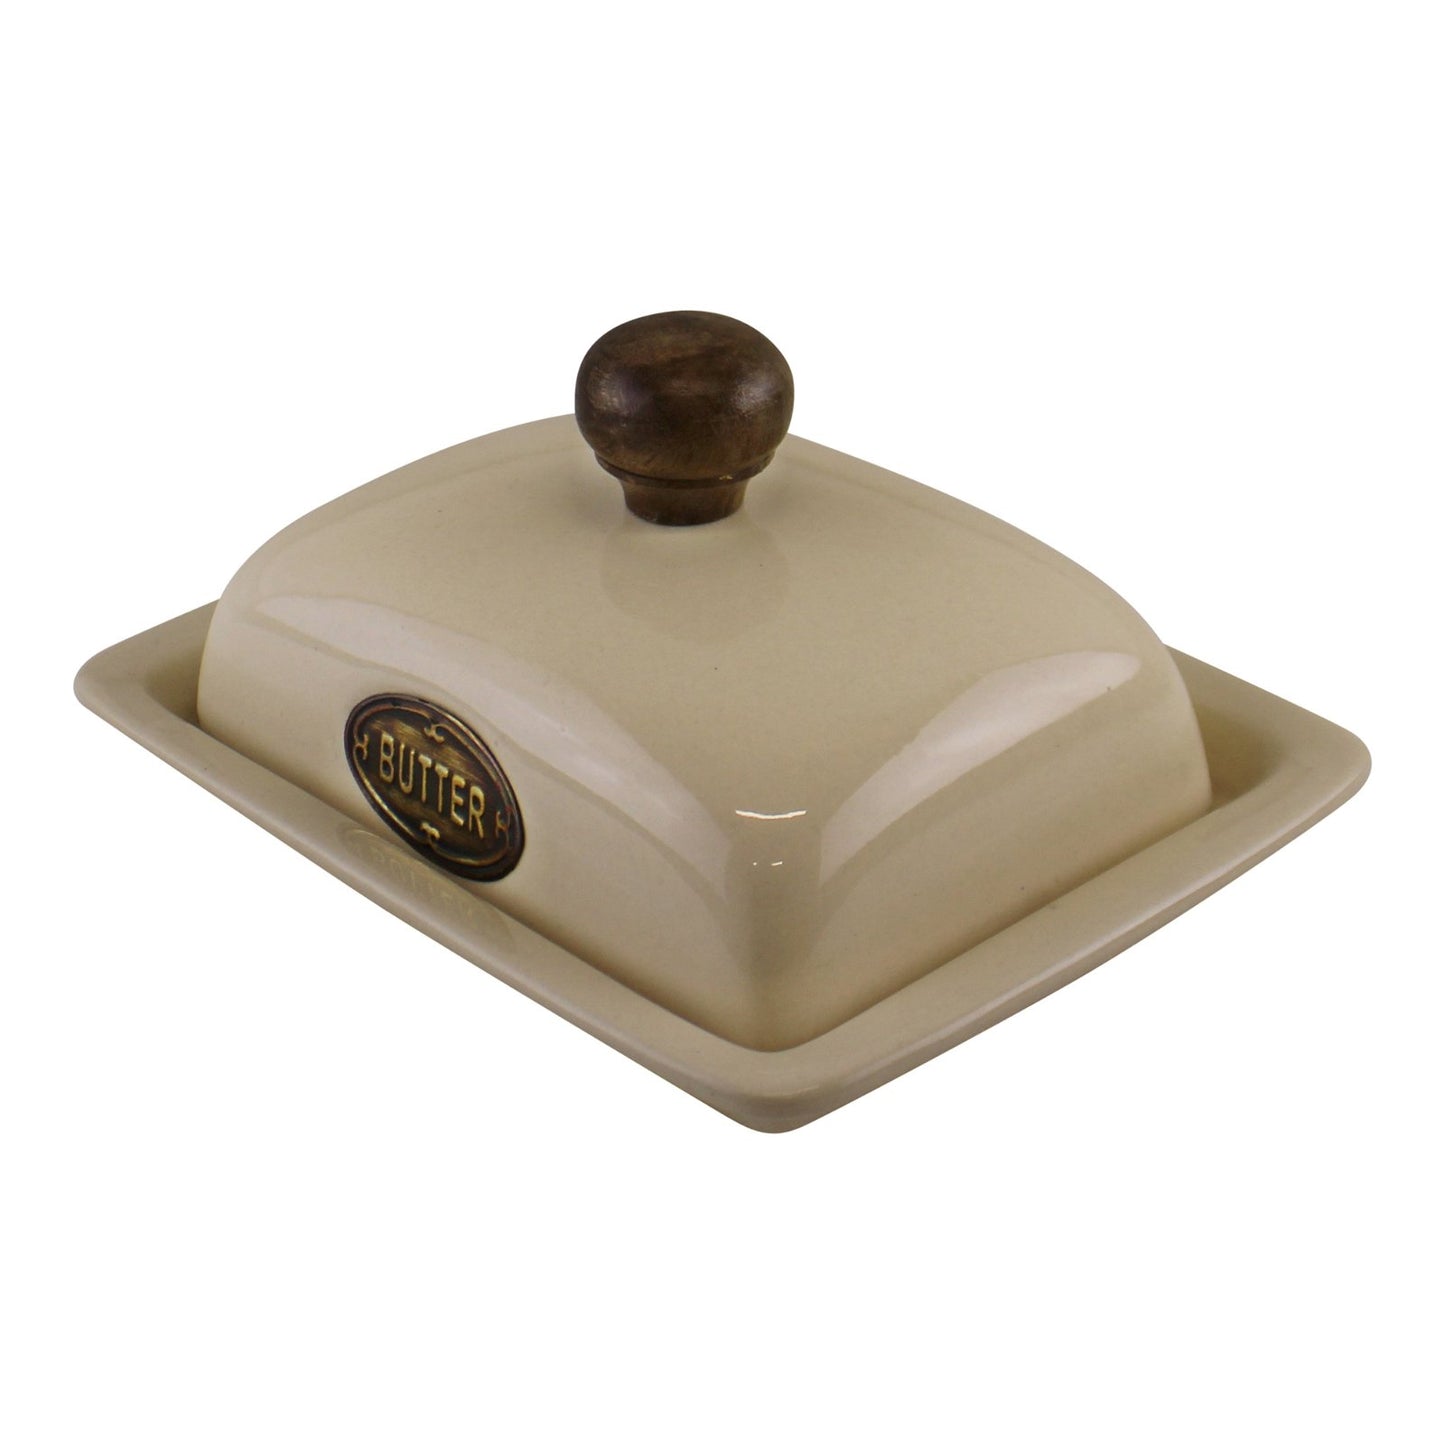 Country Cottage Cream Ceramic Butter Dish - Kaftan direct